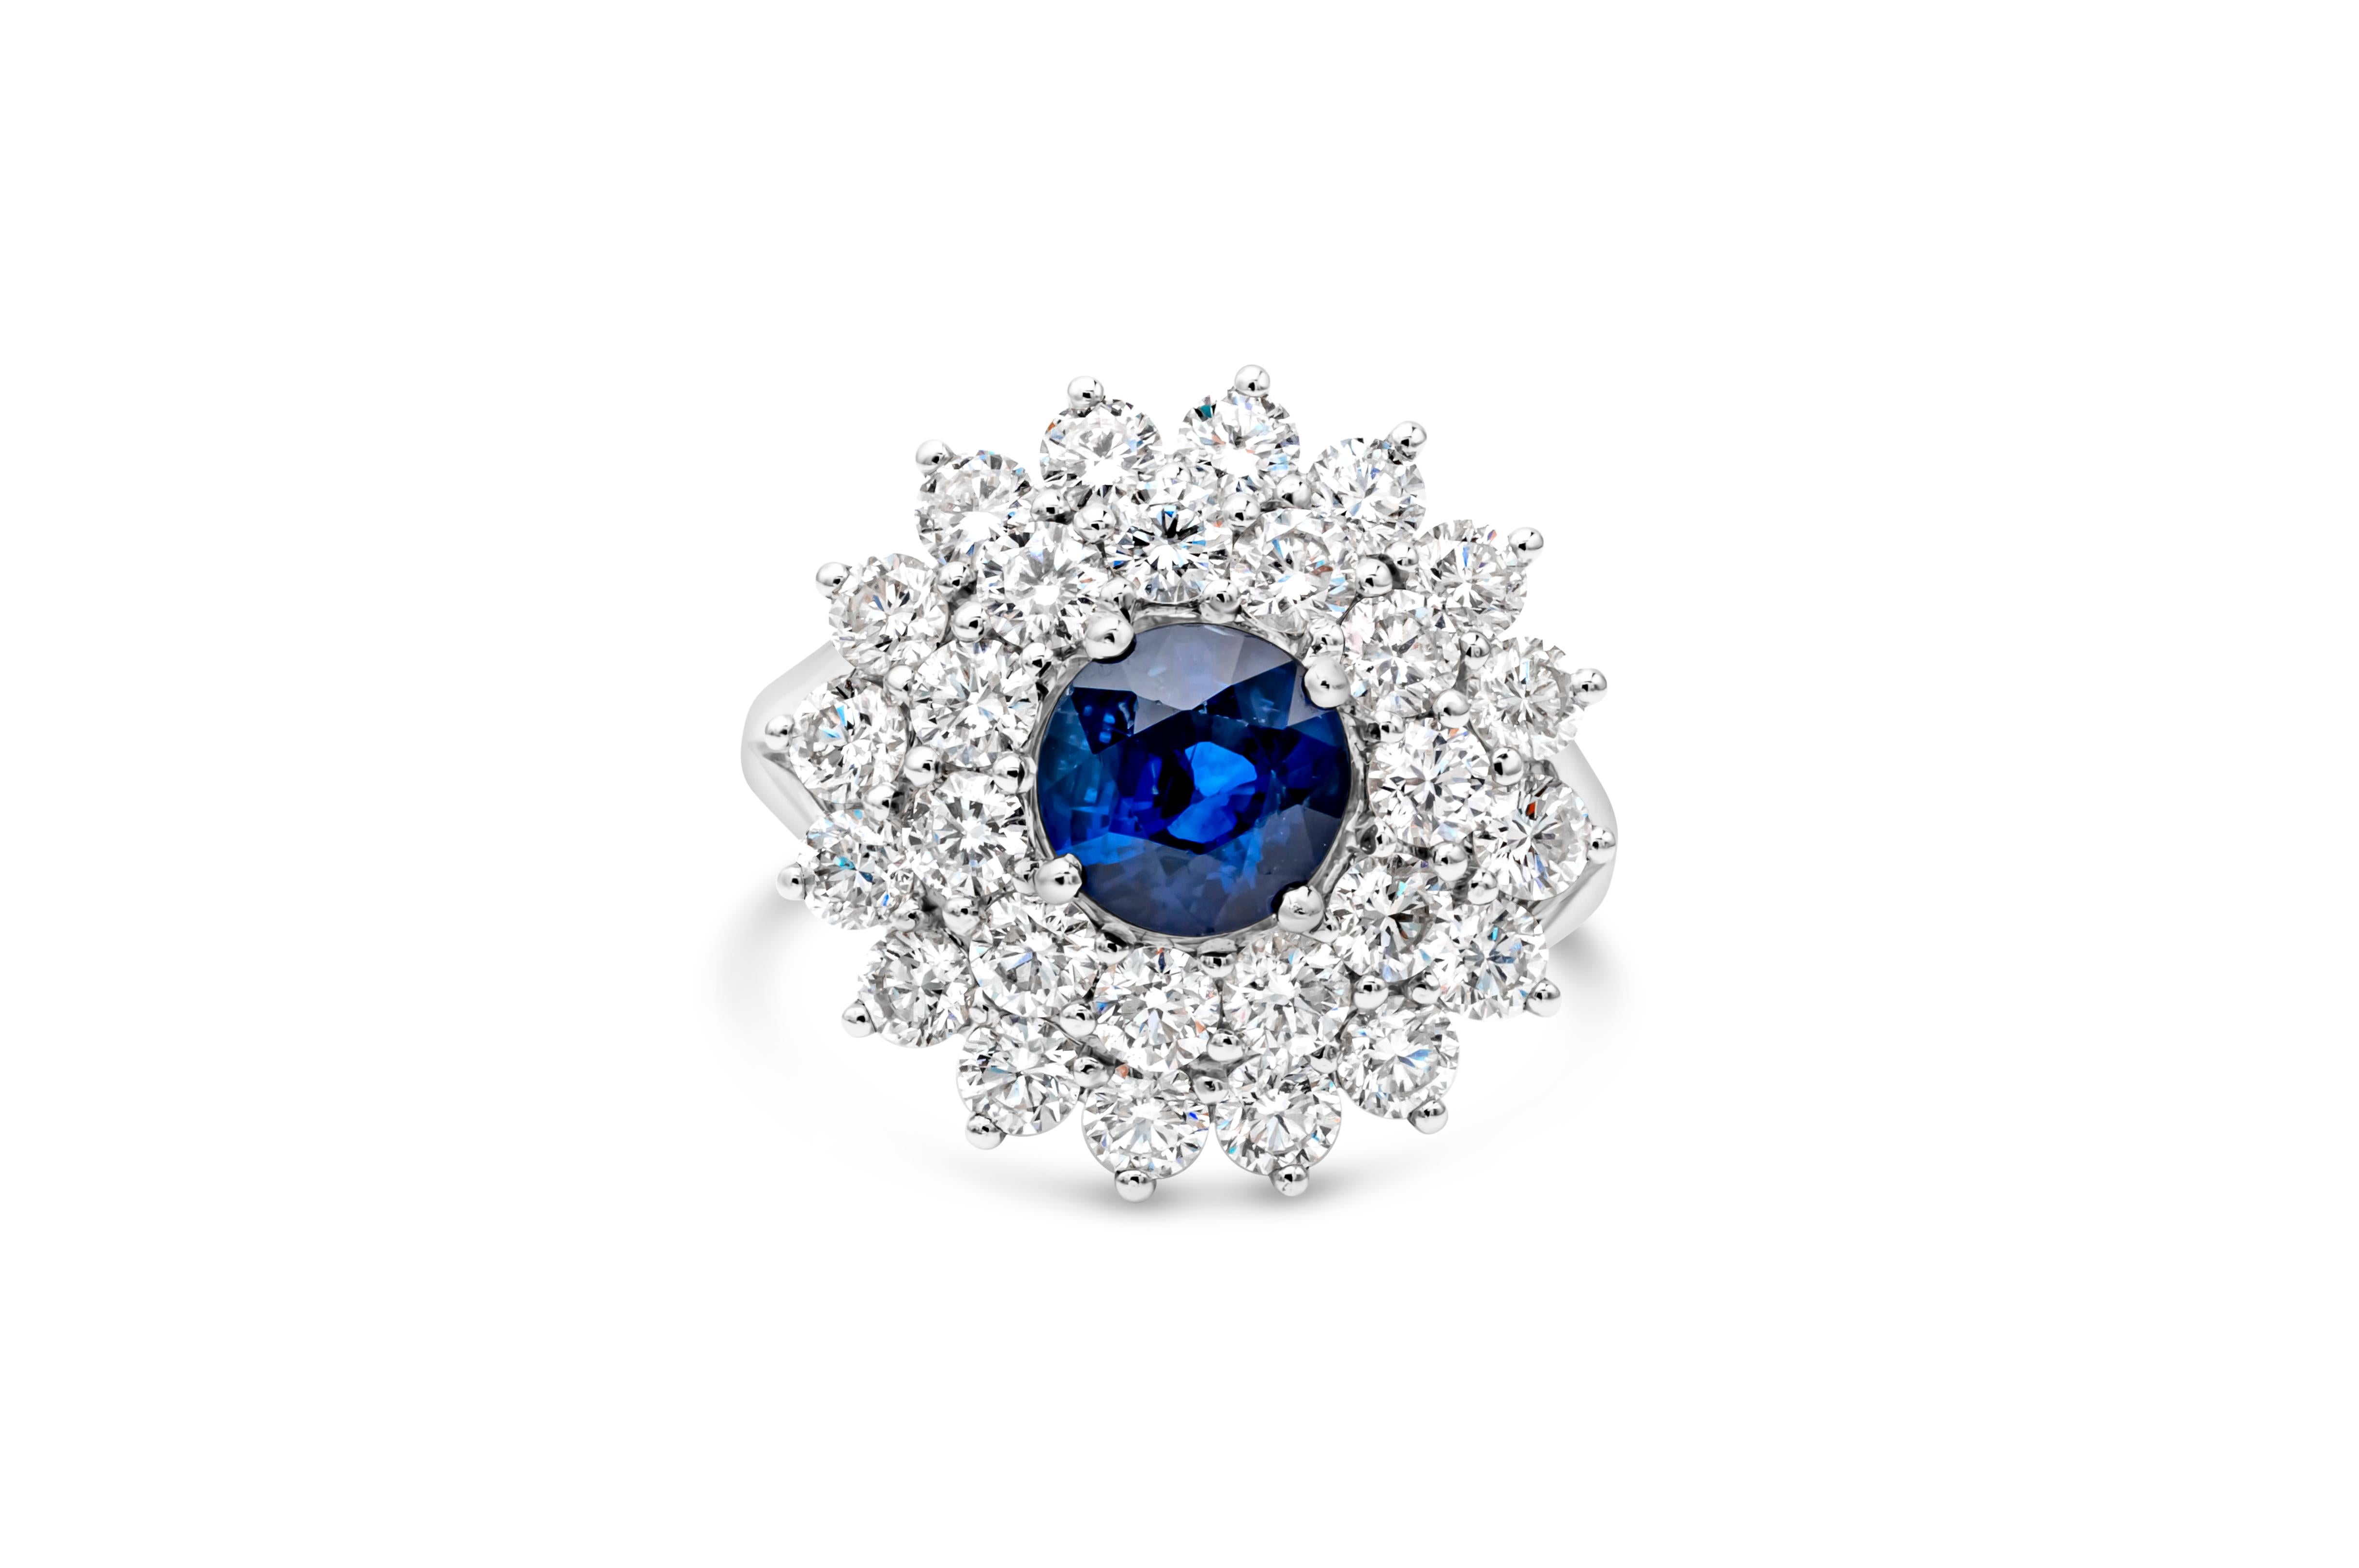 This elegant and stunning engagement ring style showcasing a round cut blue sapphire weighing 2.13 carat total, set in a classic four prong basket setting. Surrounded by brilliant round diamonds in a double halo design weighing 2.85 carats total,